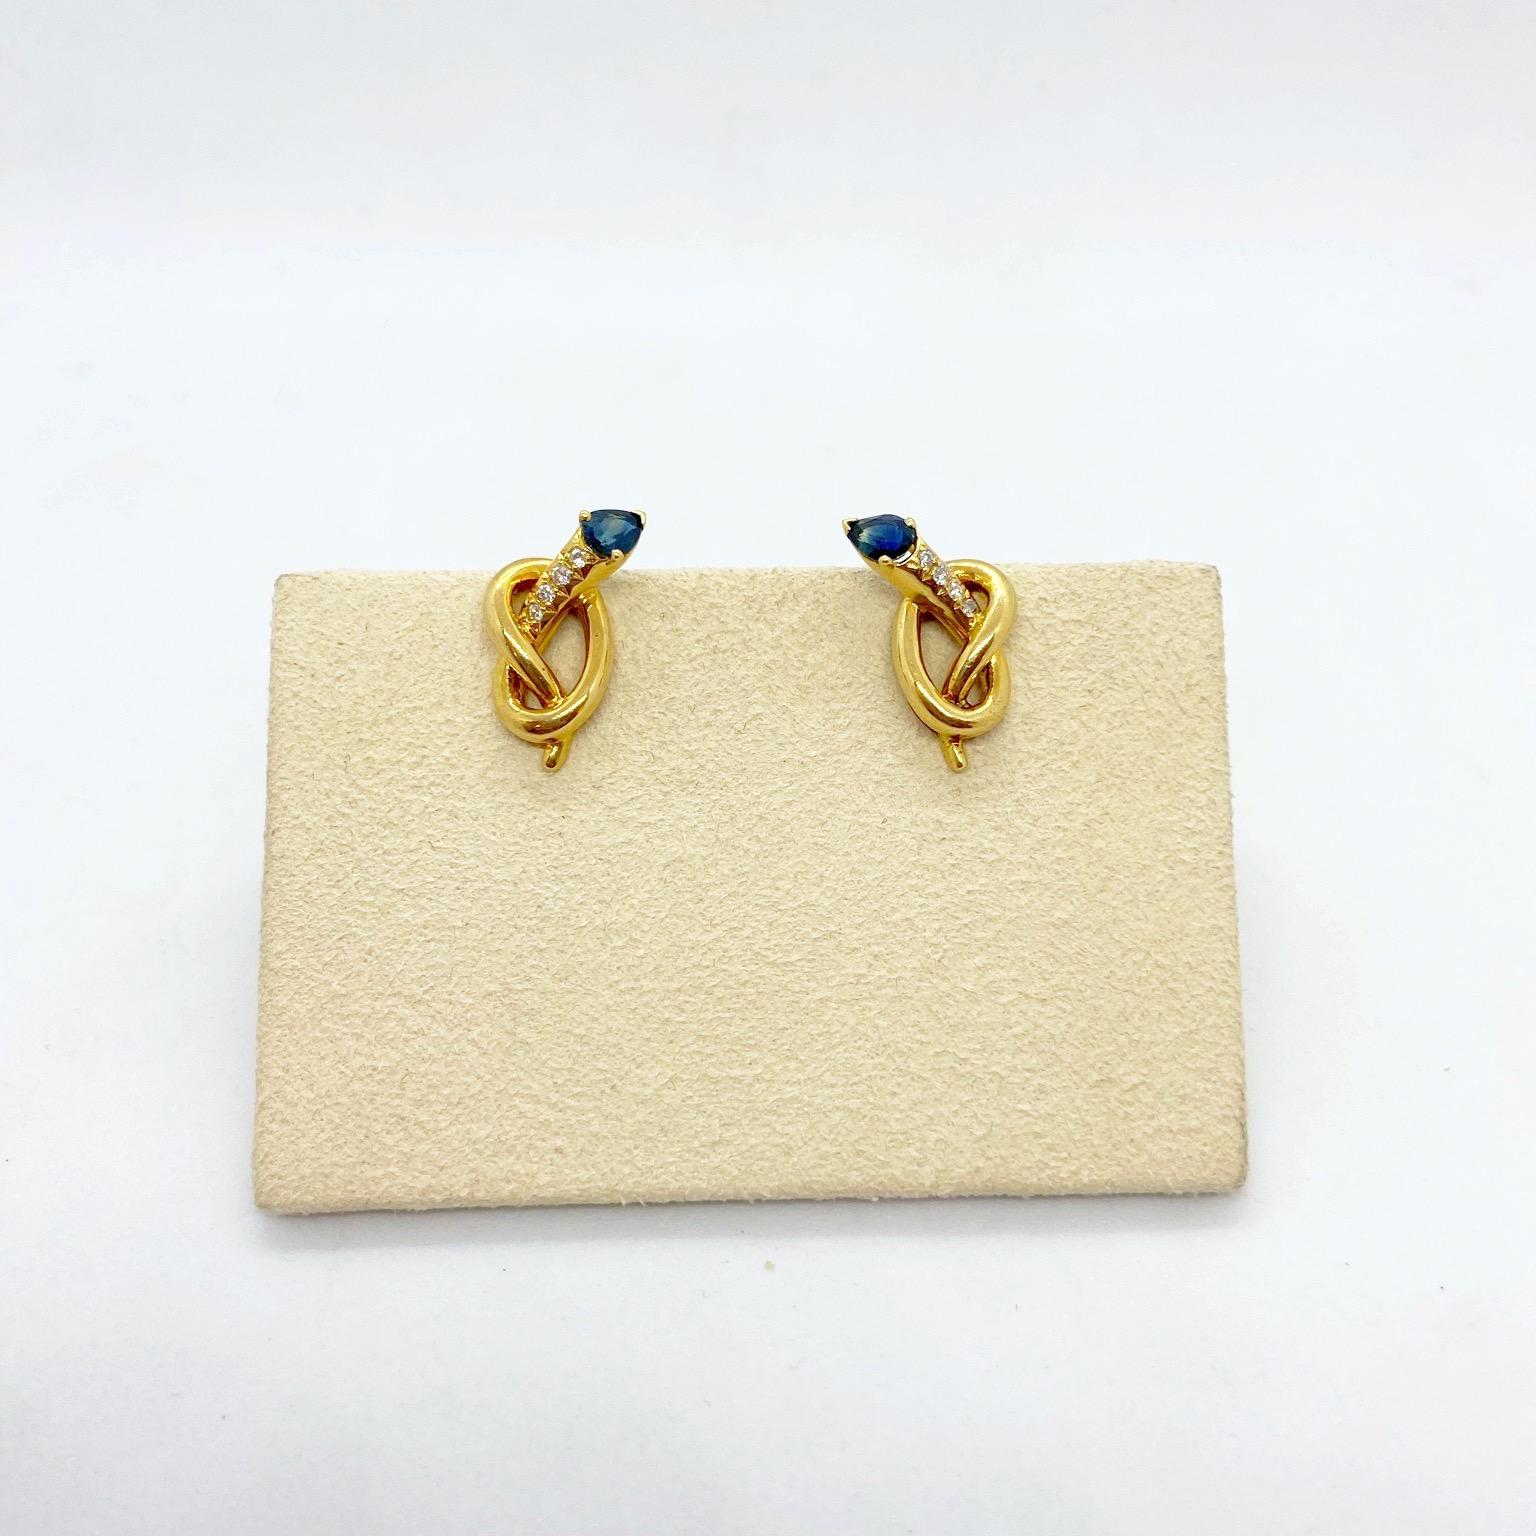 Designed by Carrera Y Carrera for Cellini NYC.
These 18 karat yellow gold knot earrings are set with .08 carats diamonds. Each tip is set with a pear shaped blue sapphire 0.90 carats. The earrings are clip on, posts can be added. They measure